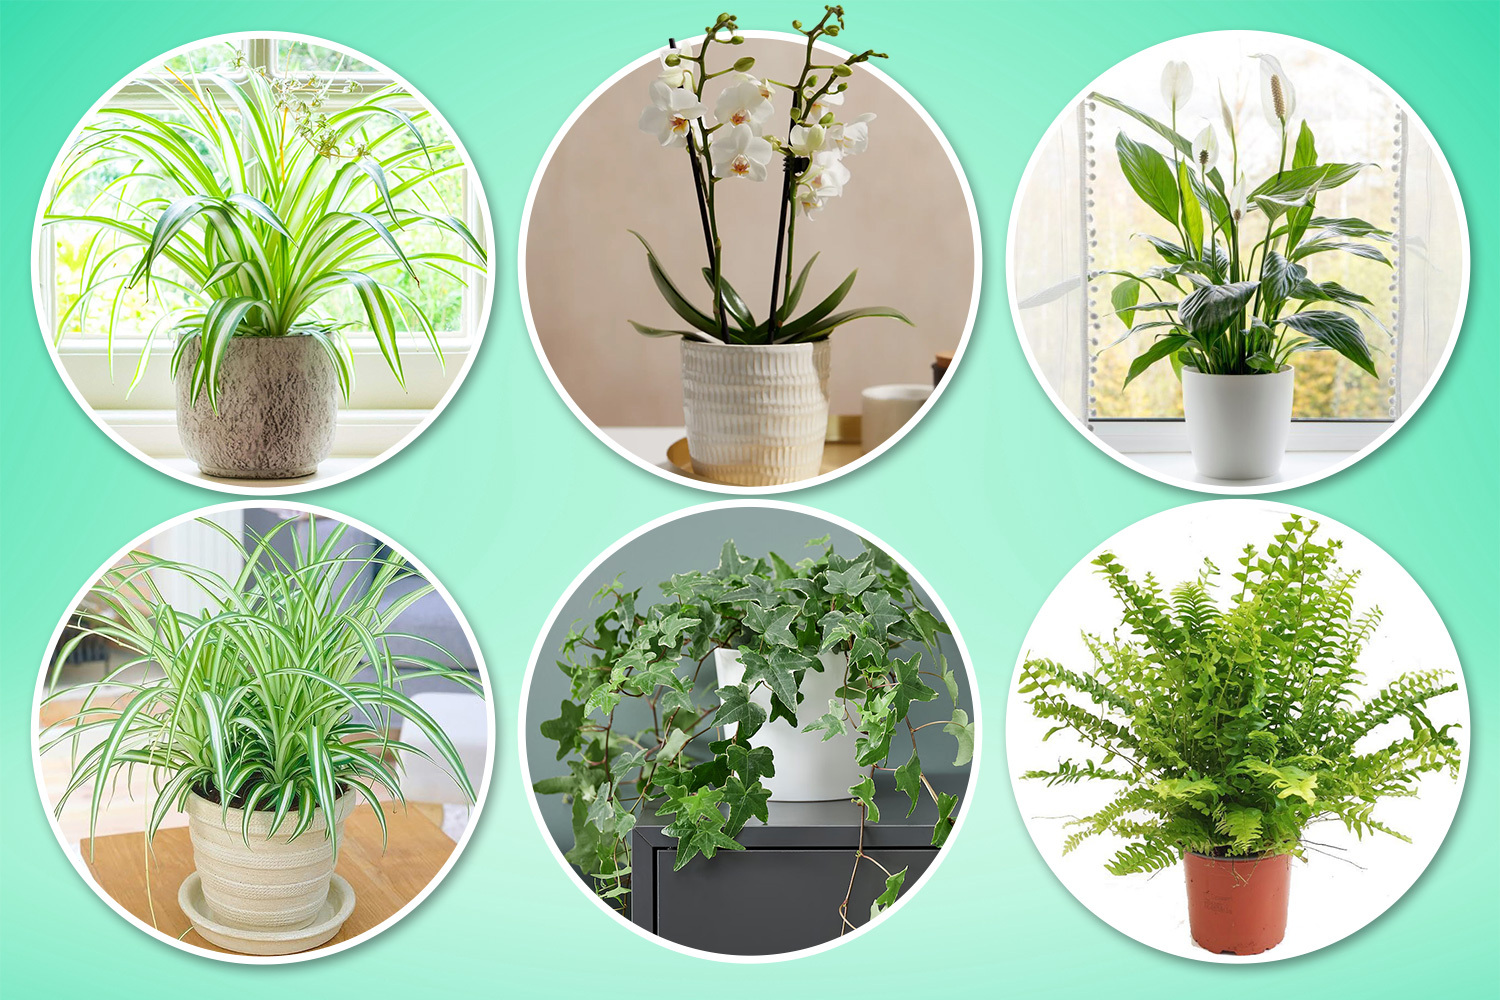 Seven mould-beating houseplants on sale at Ikea, B&Q and Amazon